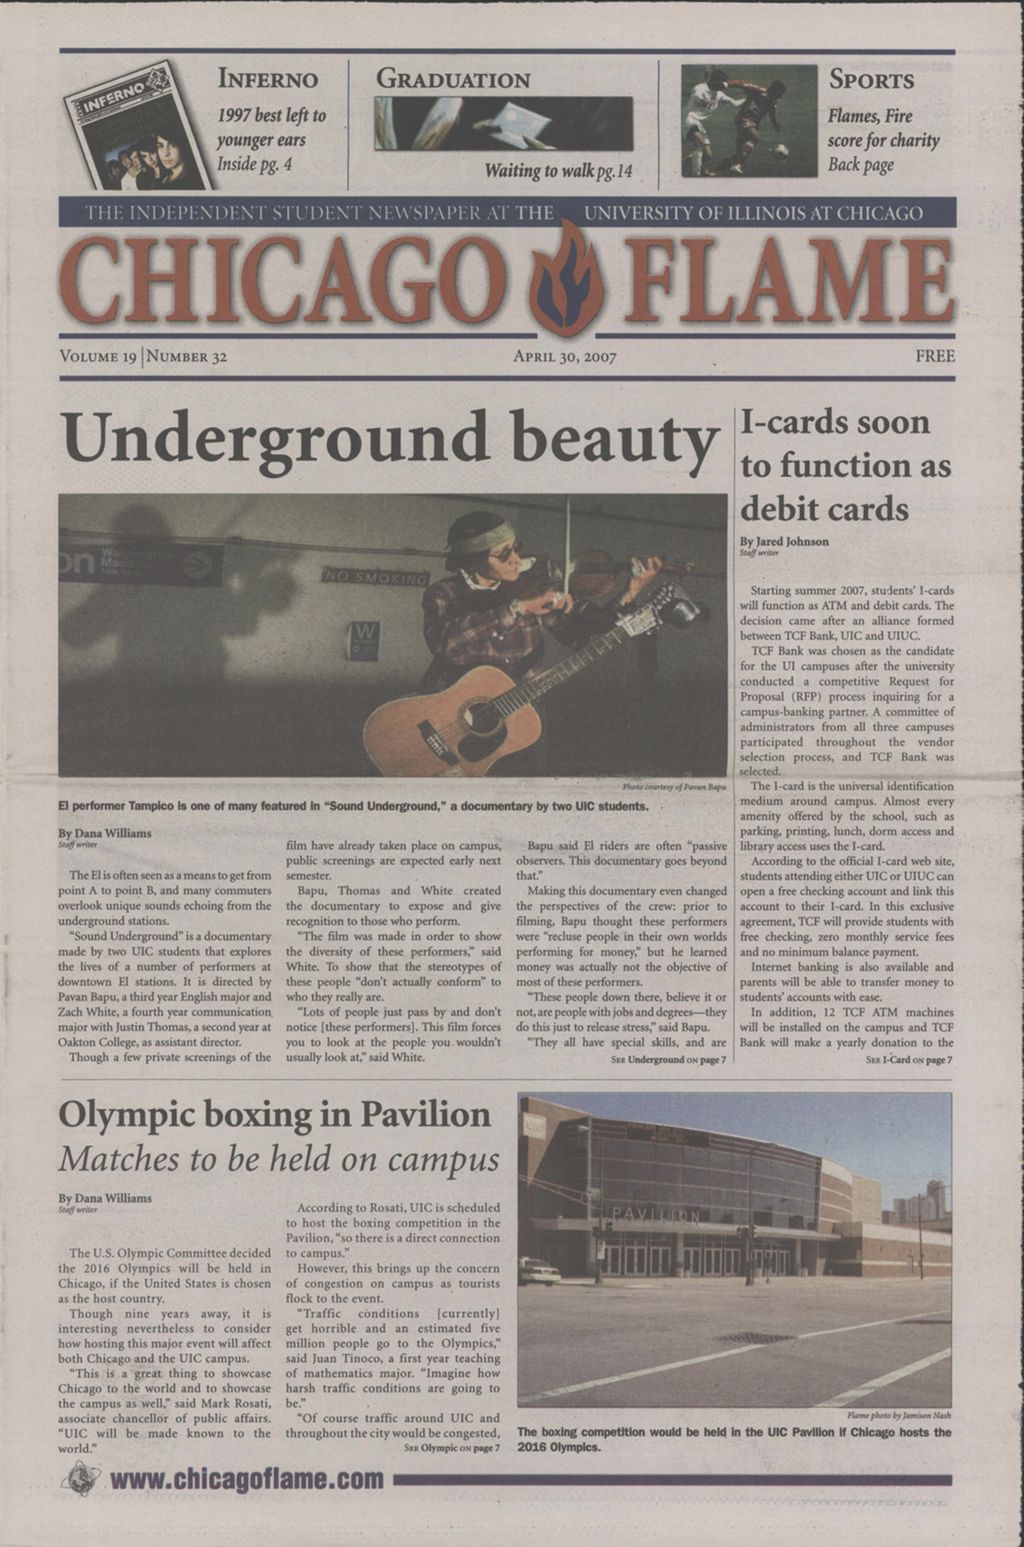 Chicago Flame (April 30, 2007)